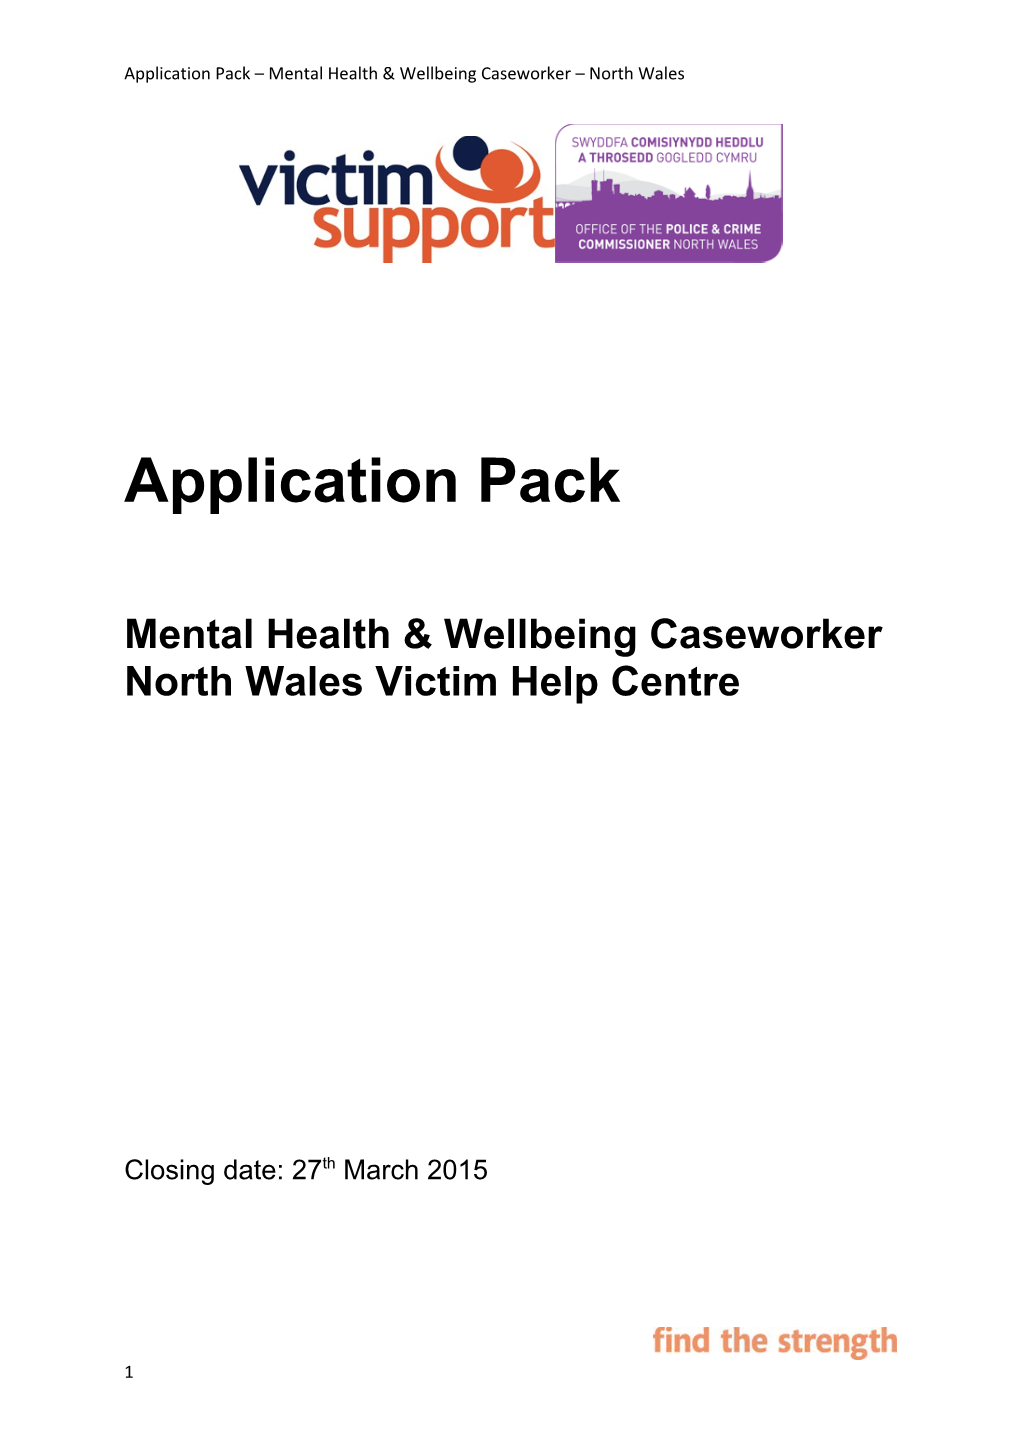 Application Pack Mental Health & Wellbeing Caseworker North Wales